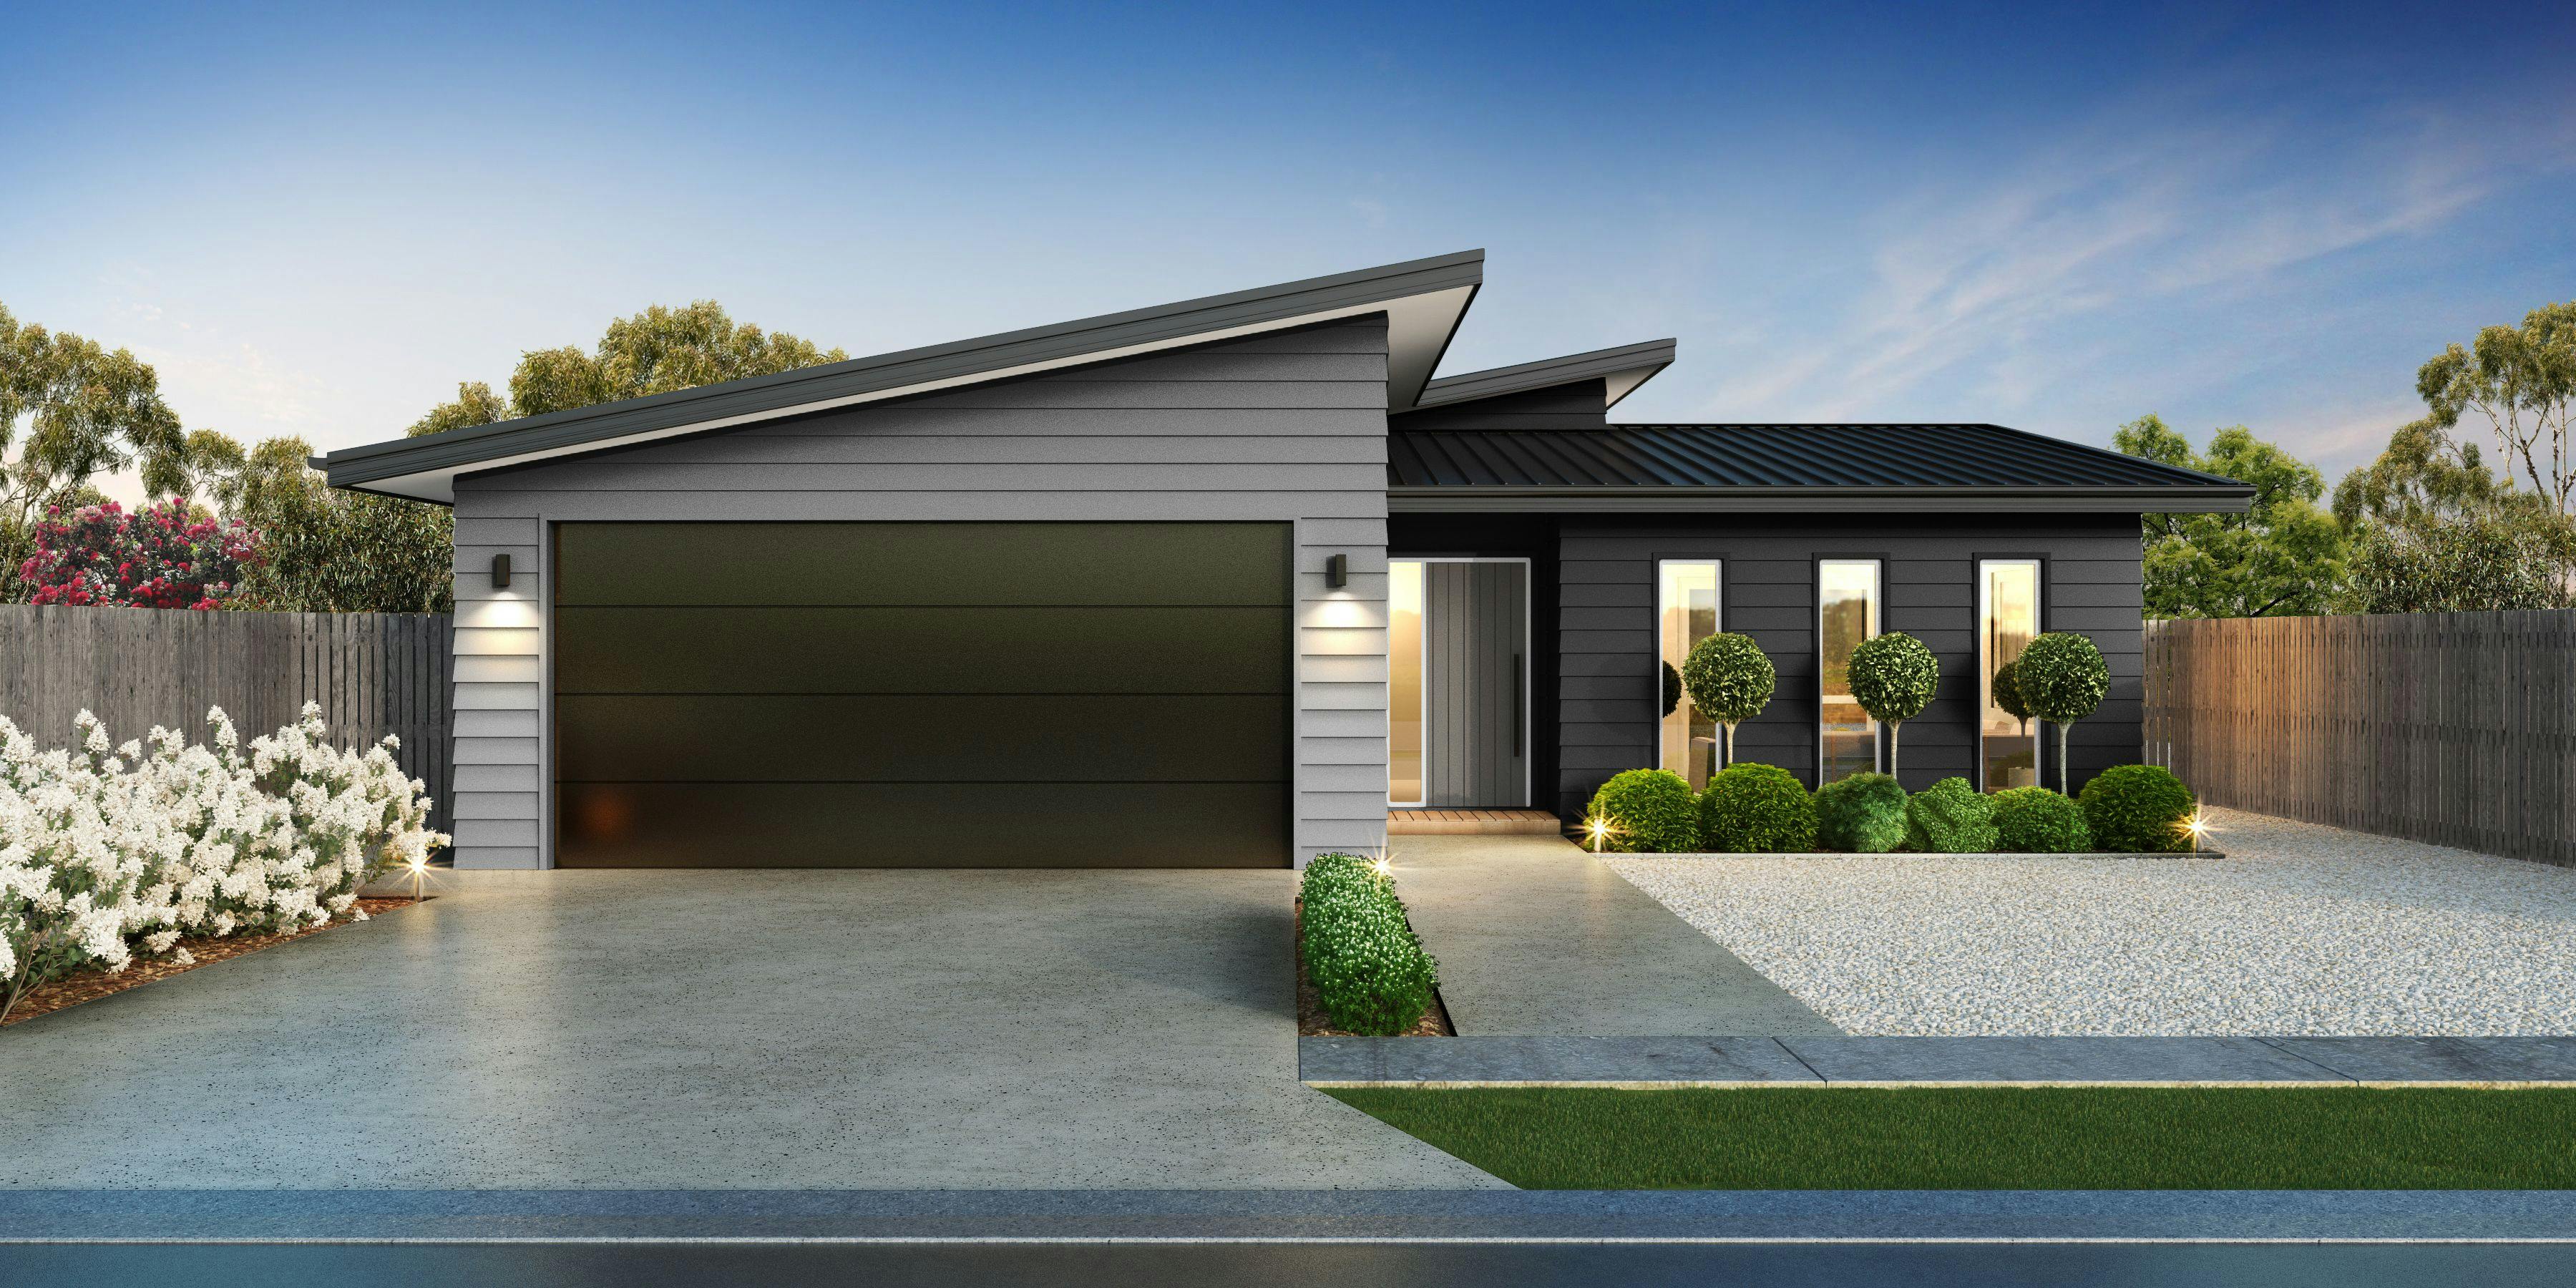 NZ169 cape horn 4 bedroom house front